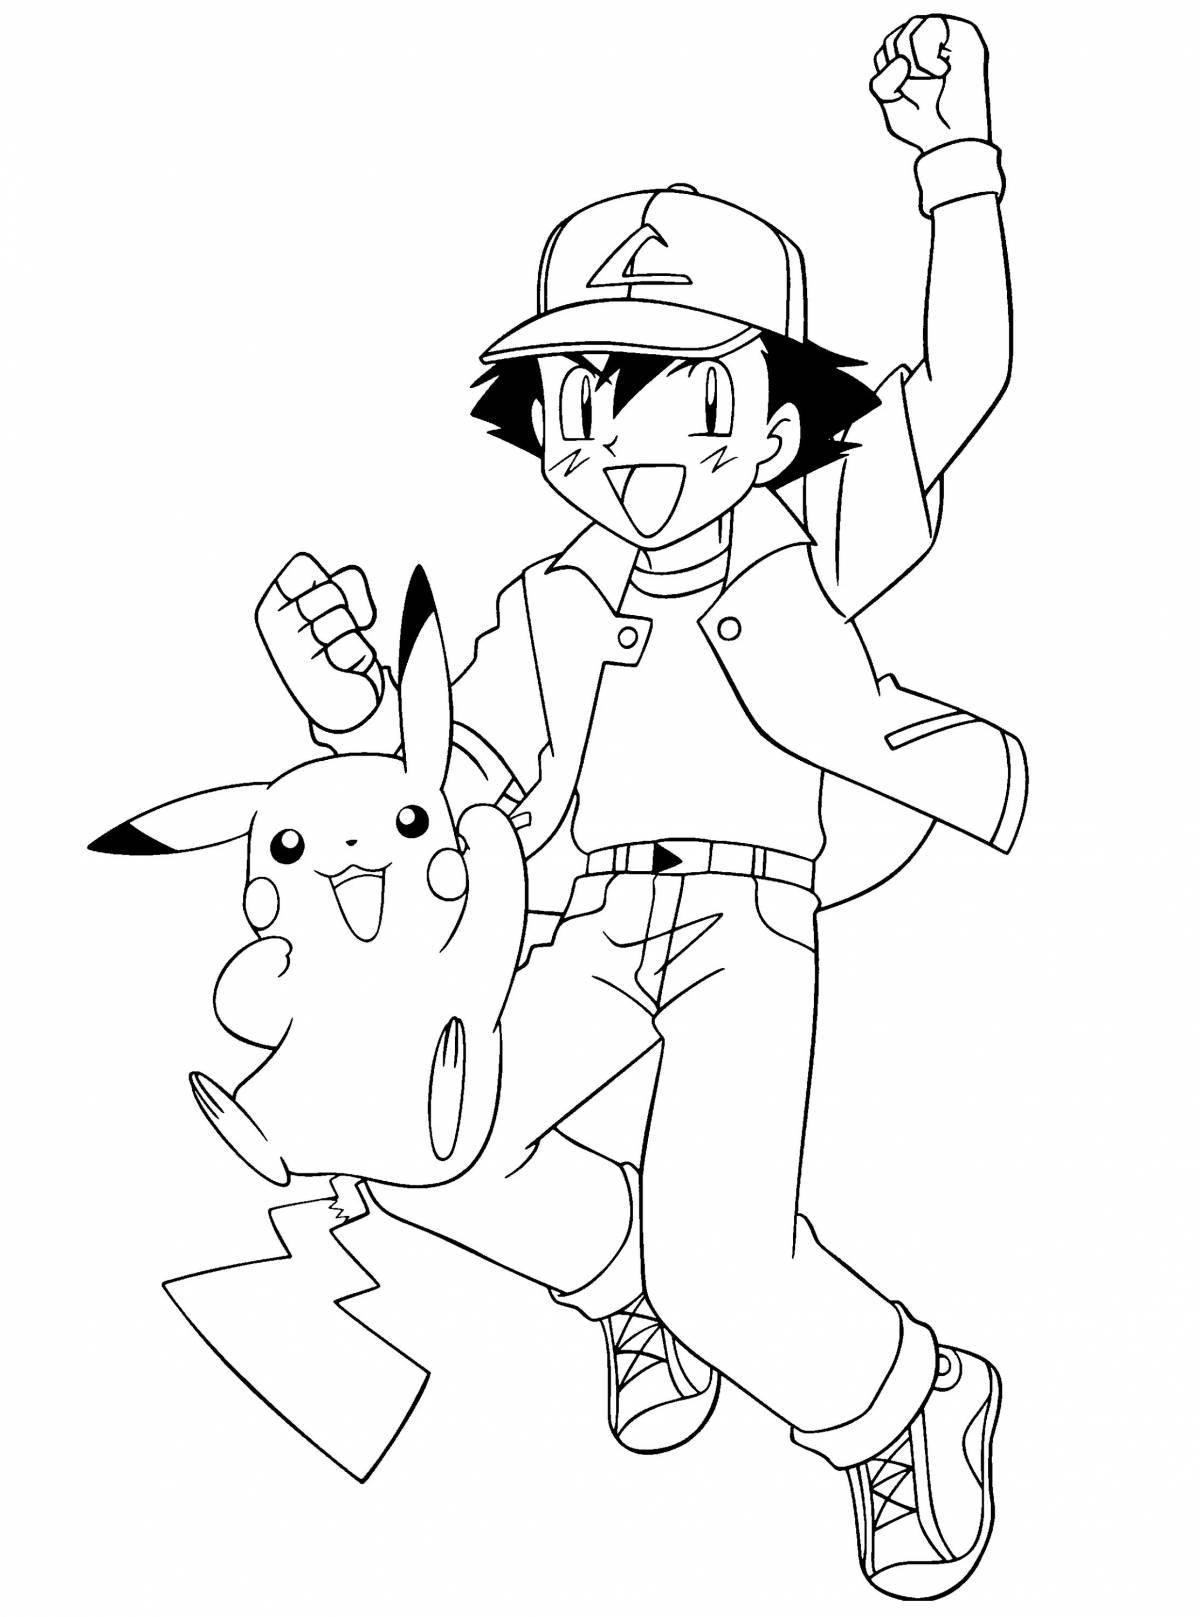 Pikachu live coloring for boys